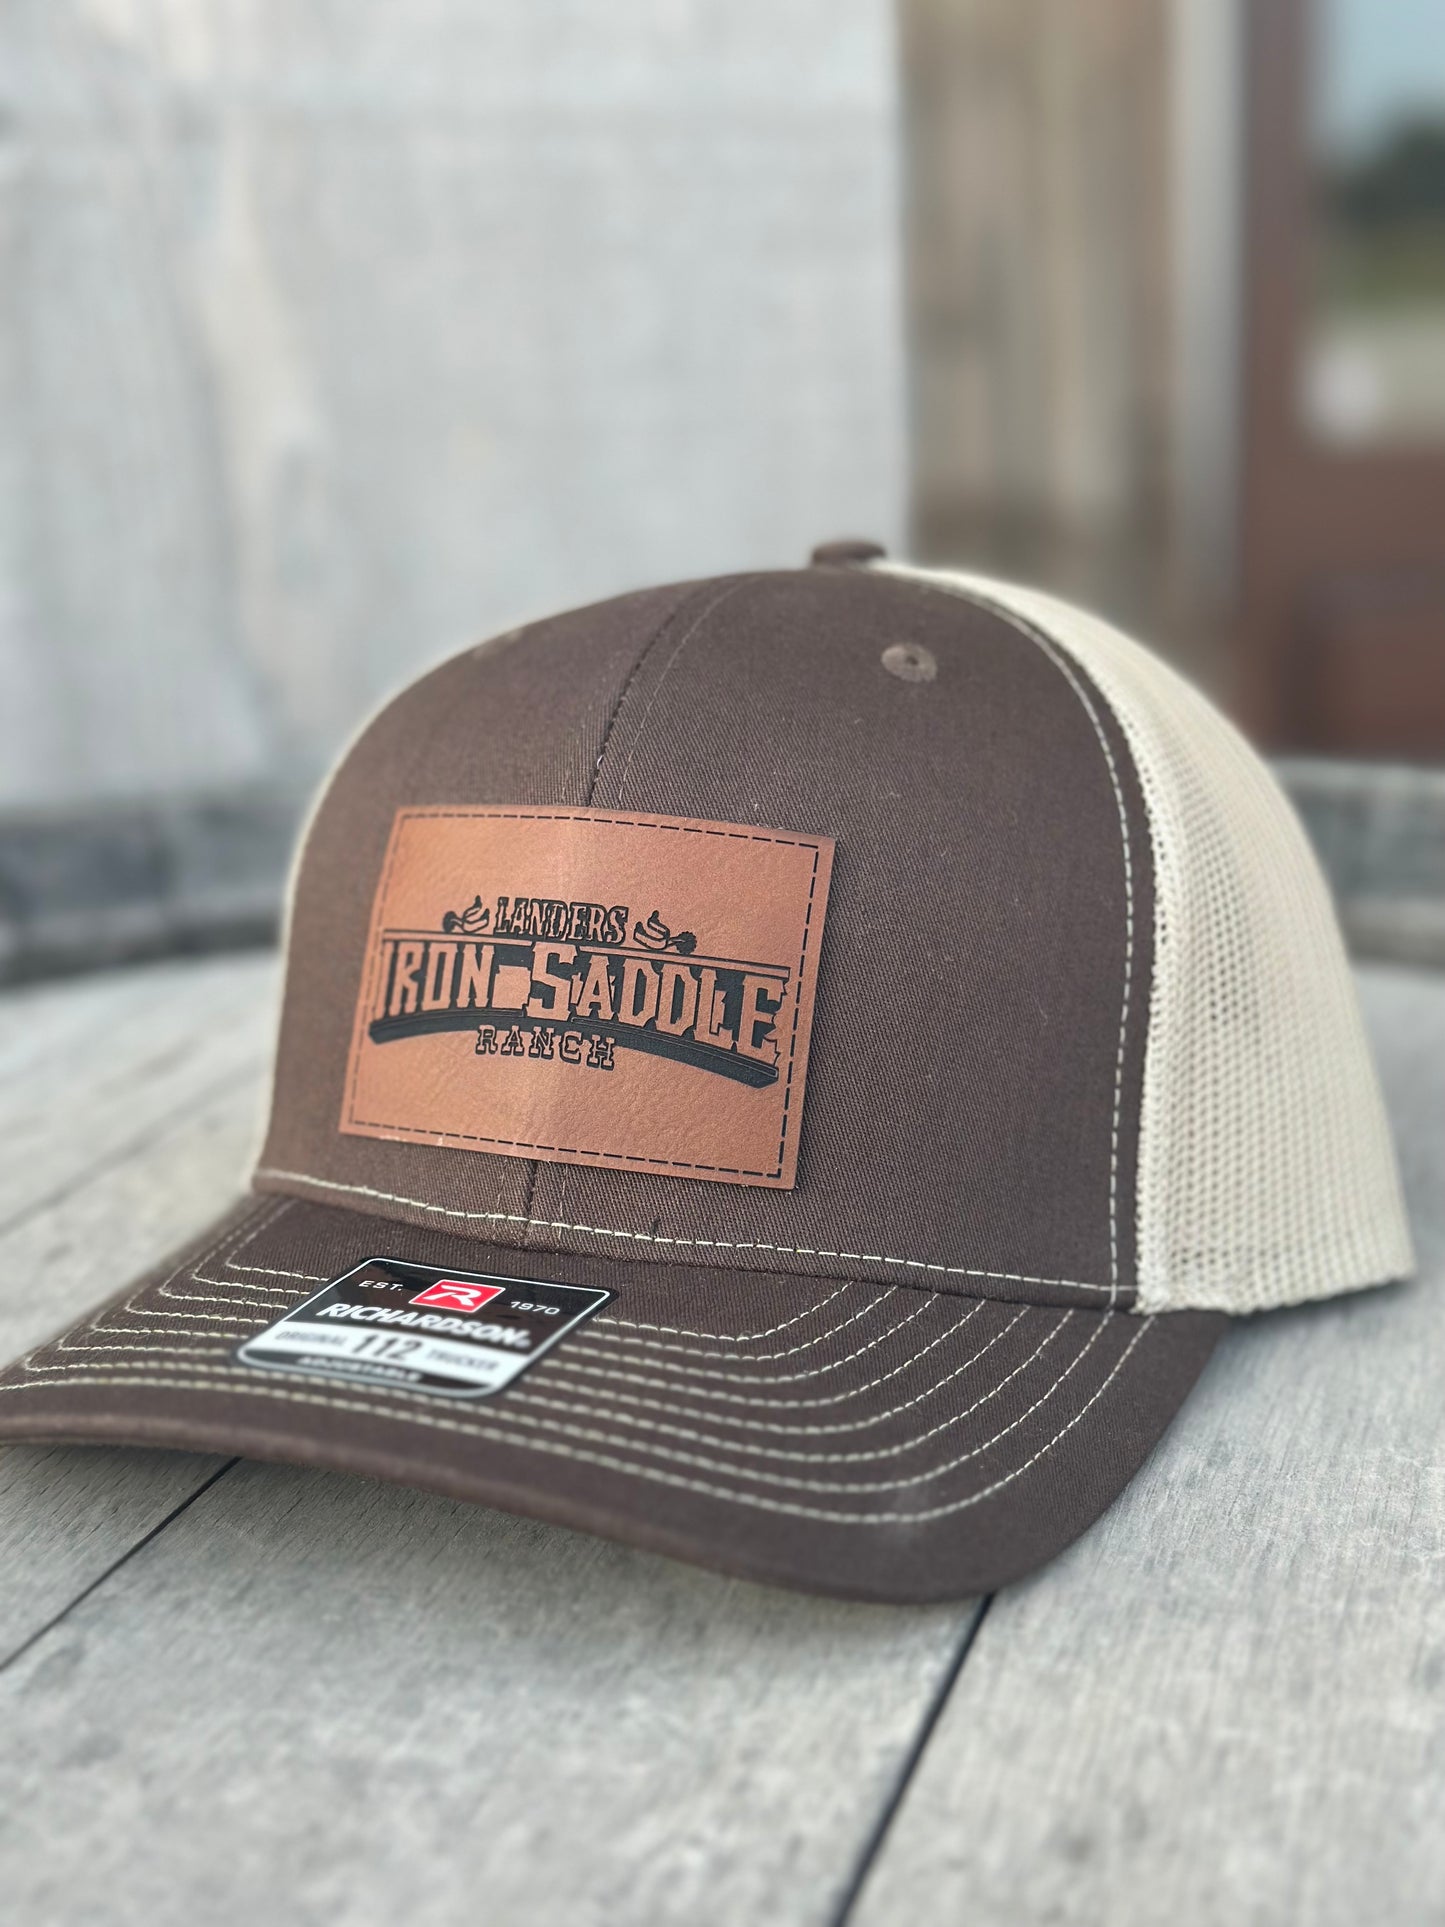 Iron Saddle Leather Patch Trucker Hat